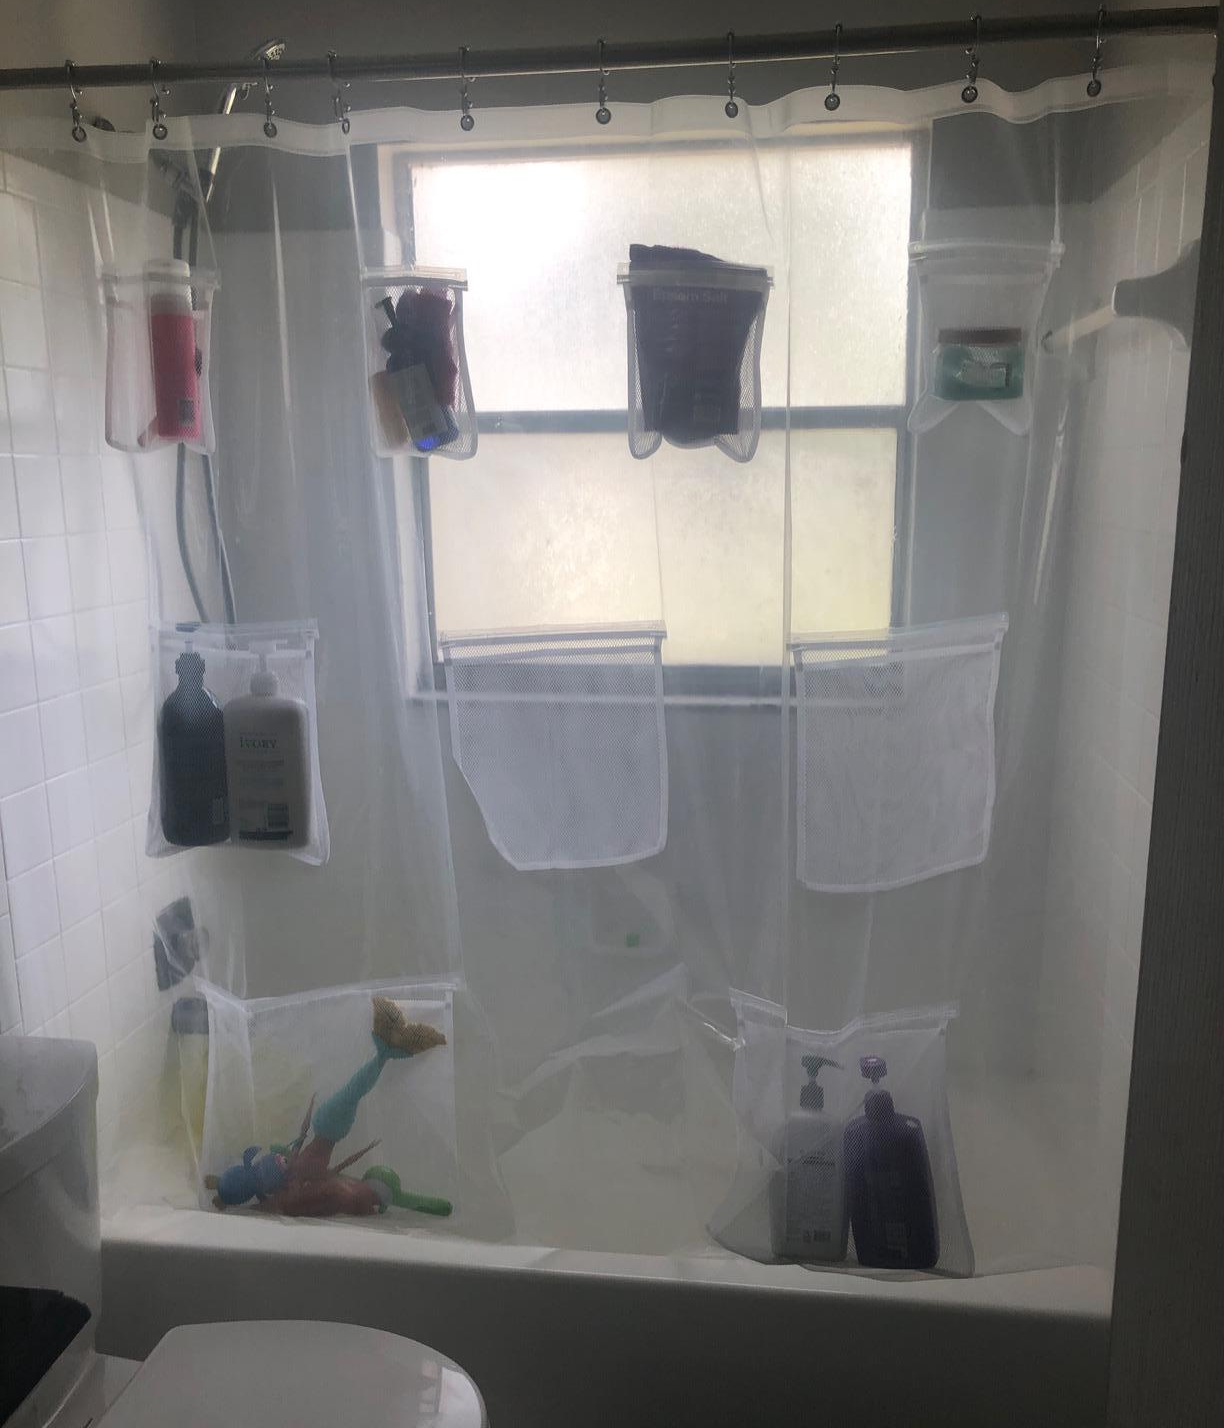 A reviewer's shower curtain, with pockets full of items